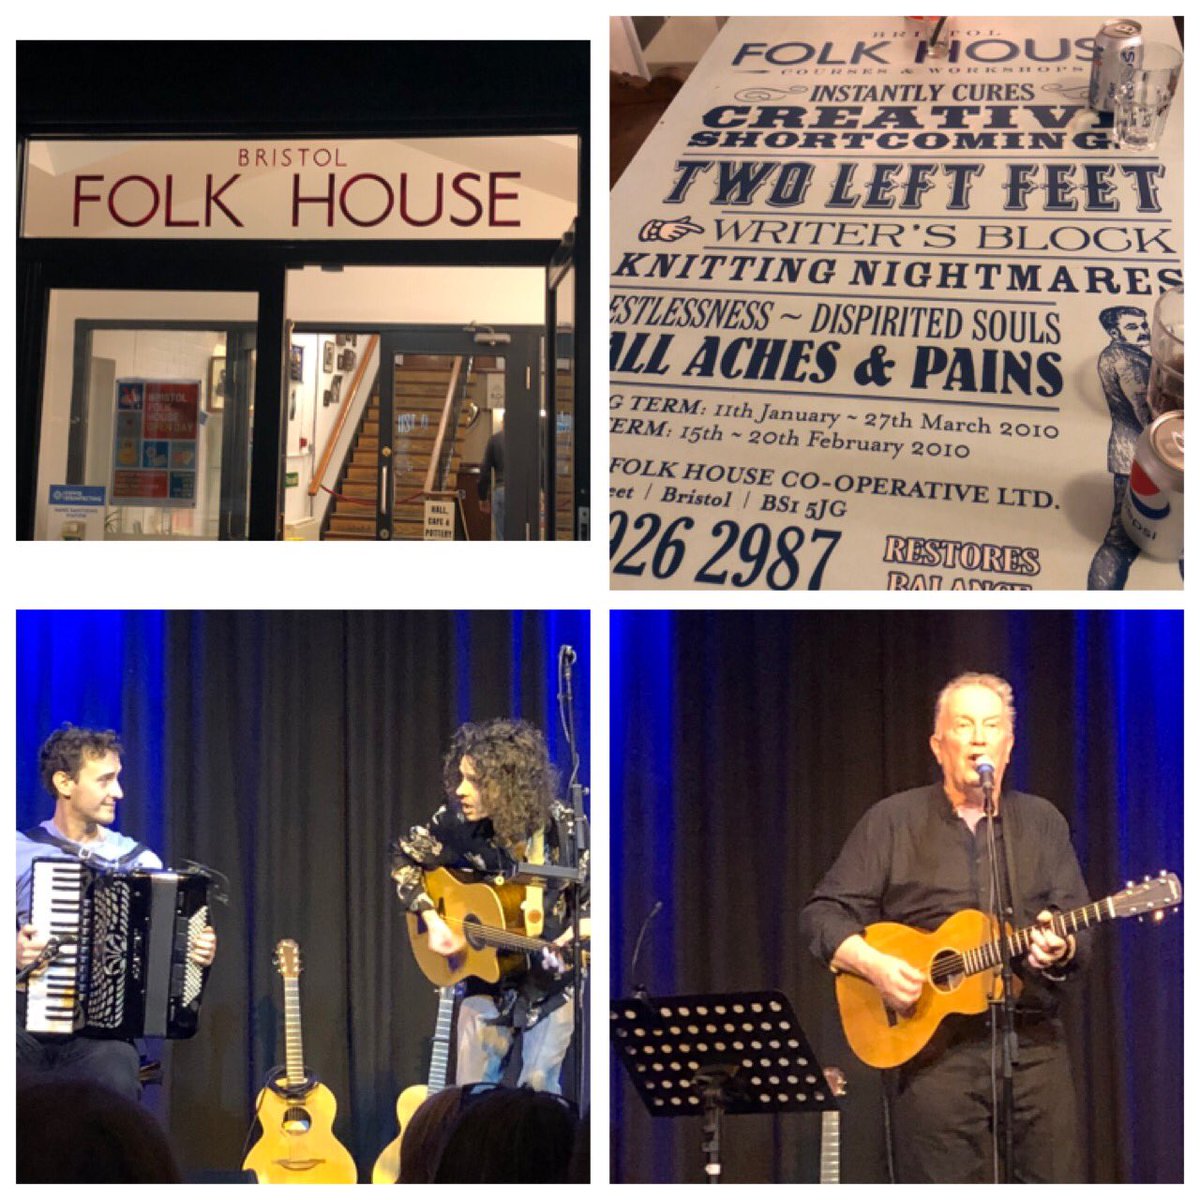 A great evening of songs and stories with Tom Robinson @folkhouse Bristol. Lovely chilled venue and a superb support by India Electric Co.